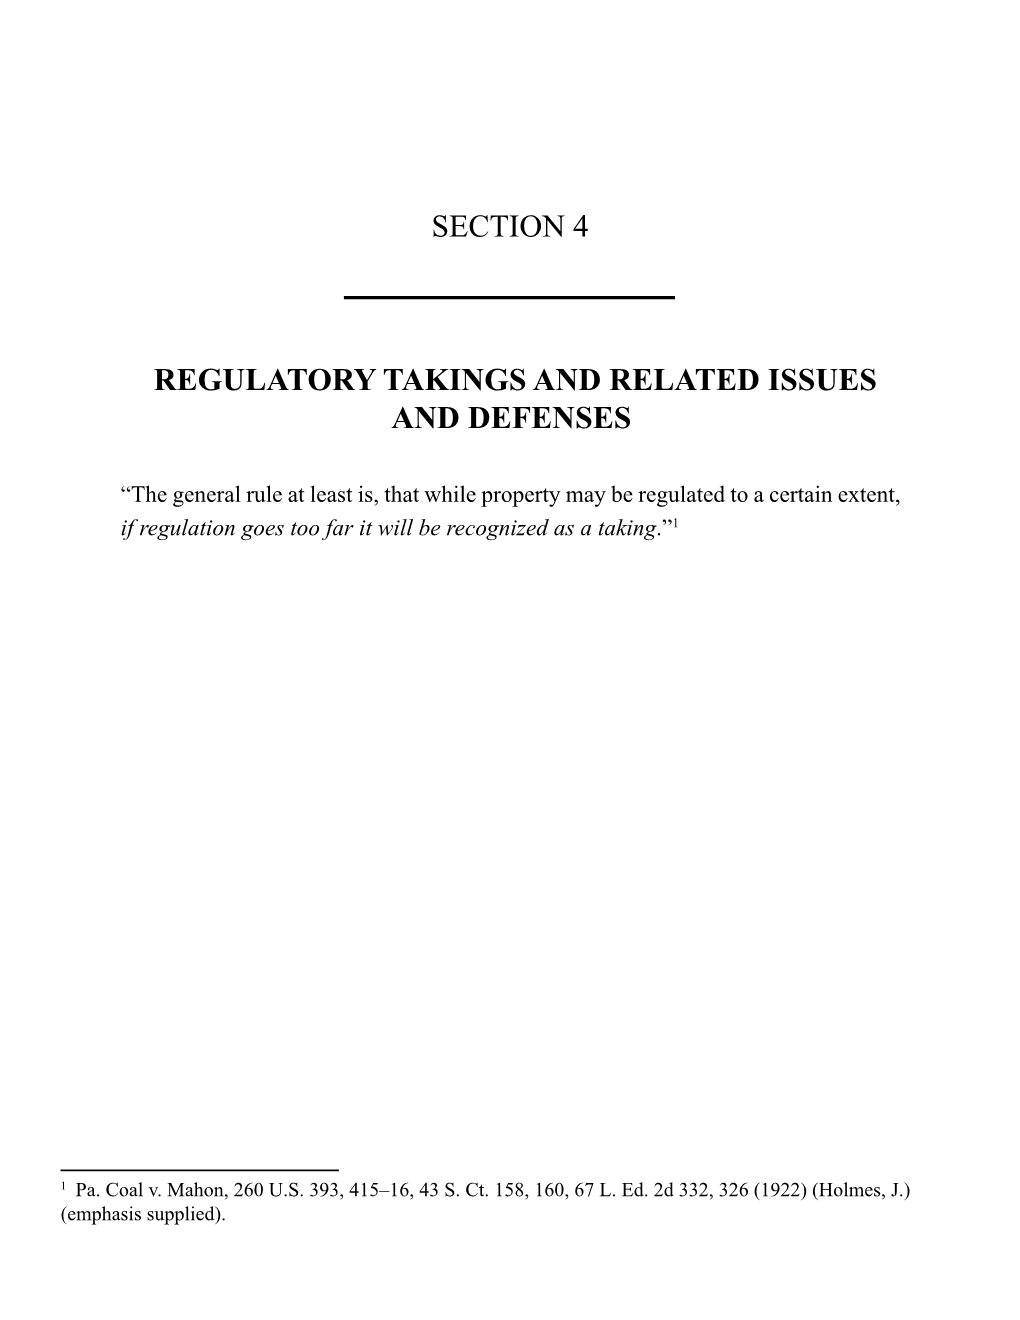 Section 4 Regulatory Takings and Related Issues And